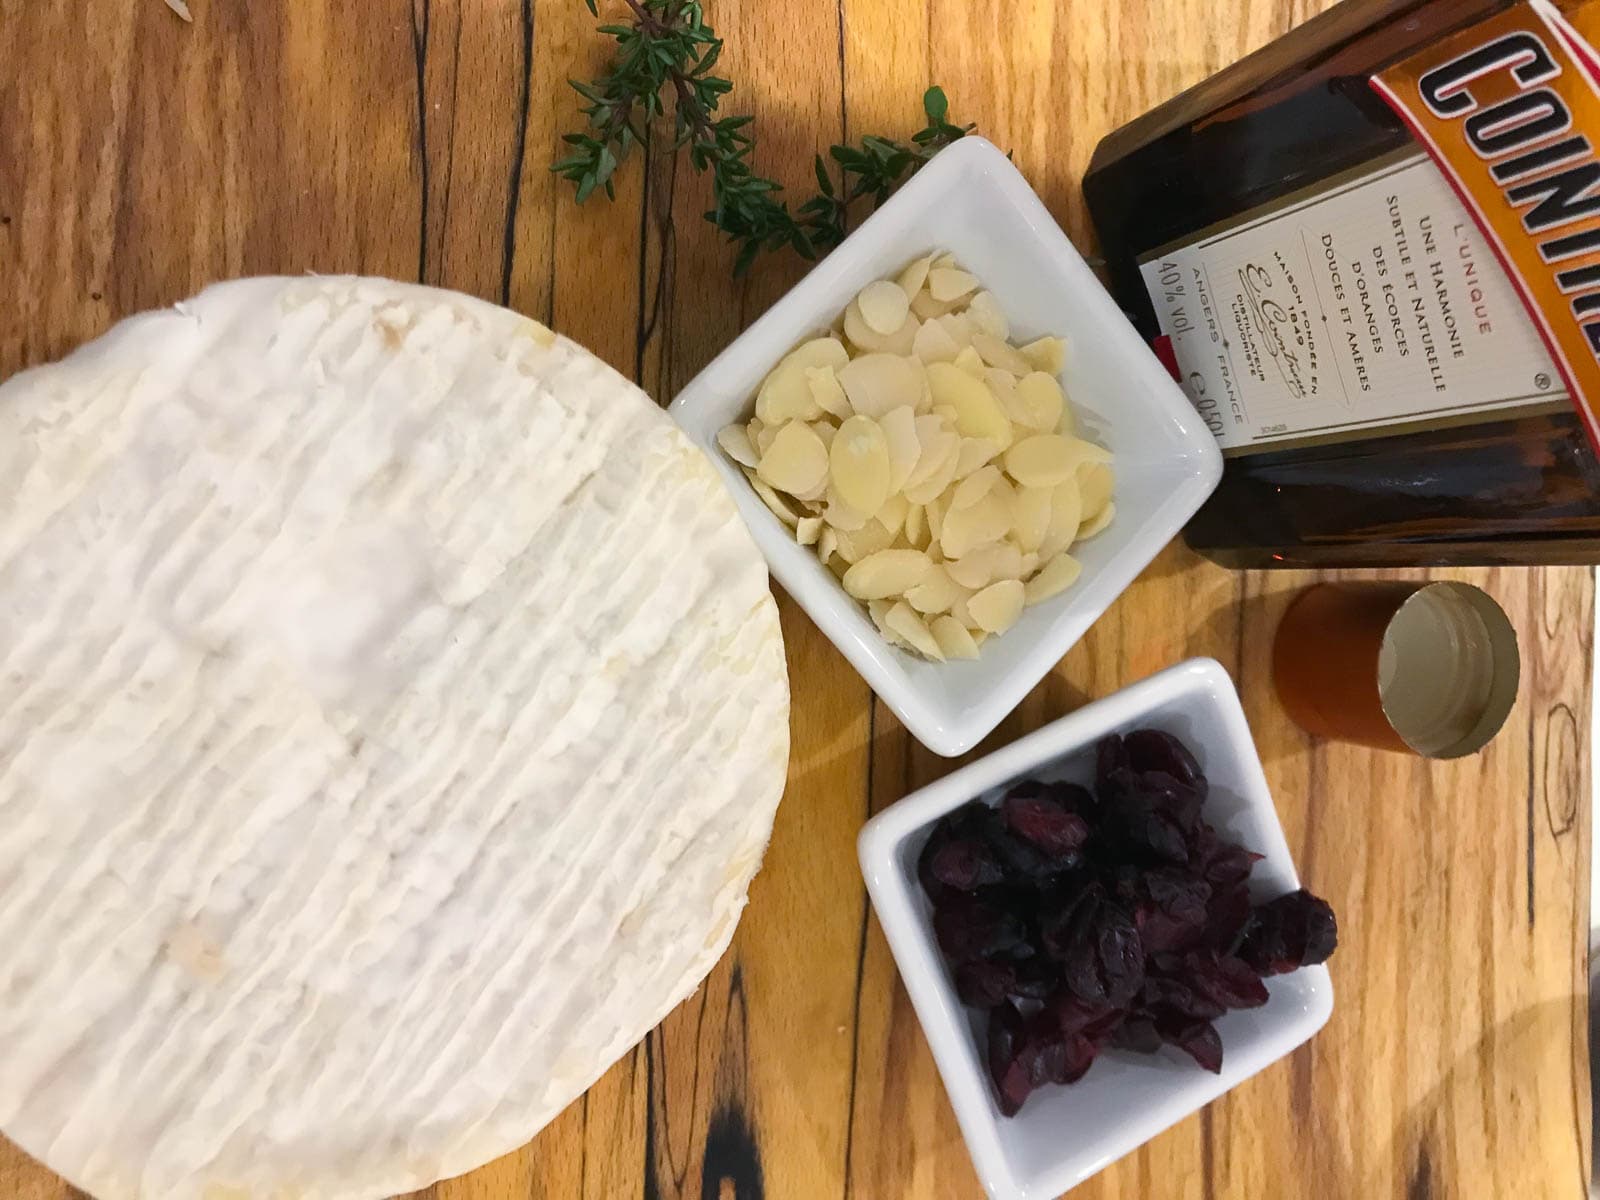 A whole camembert, some dried cranberries, sliced almonds and a bottle of Cointreau.